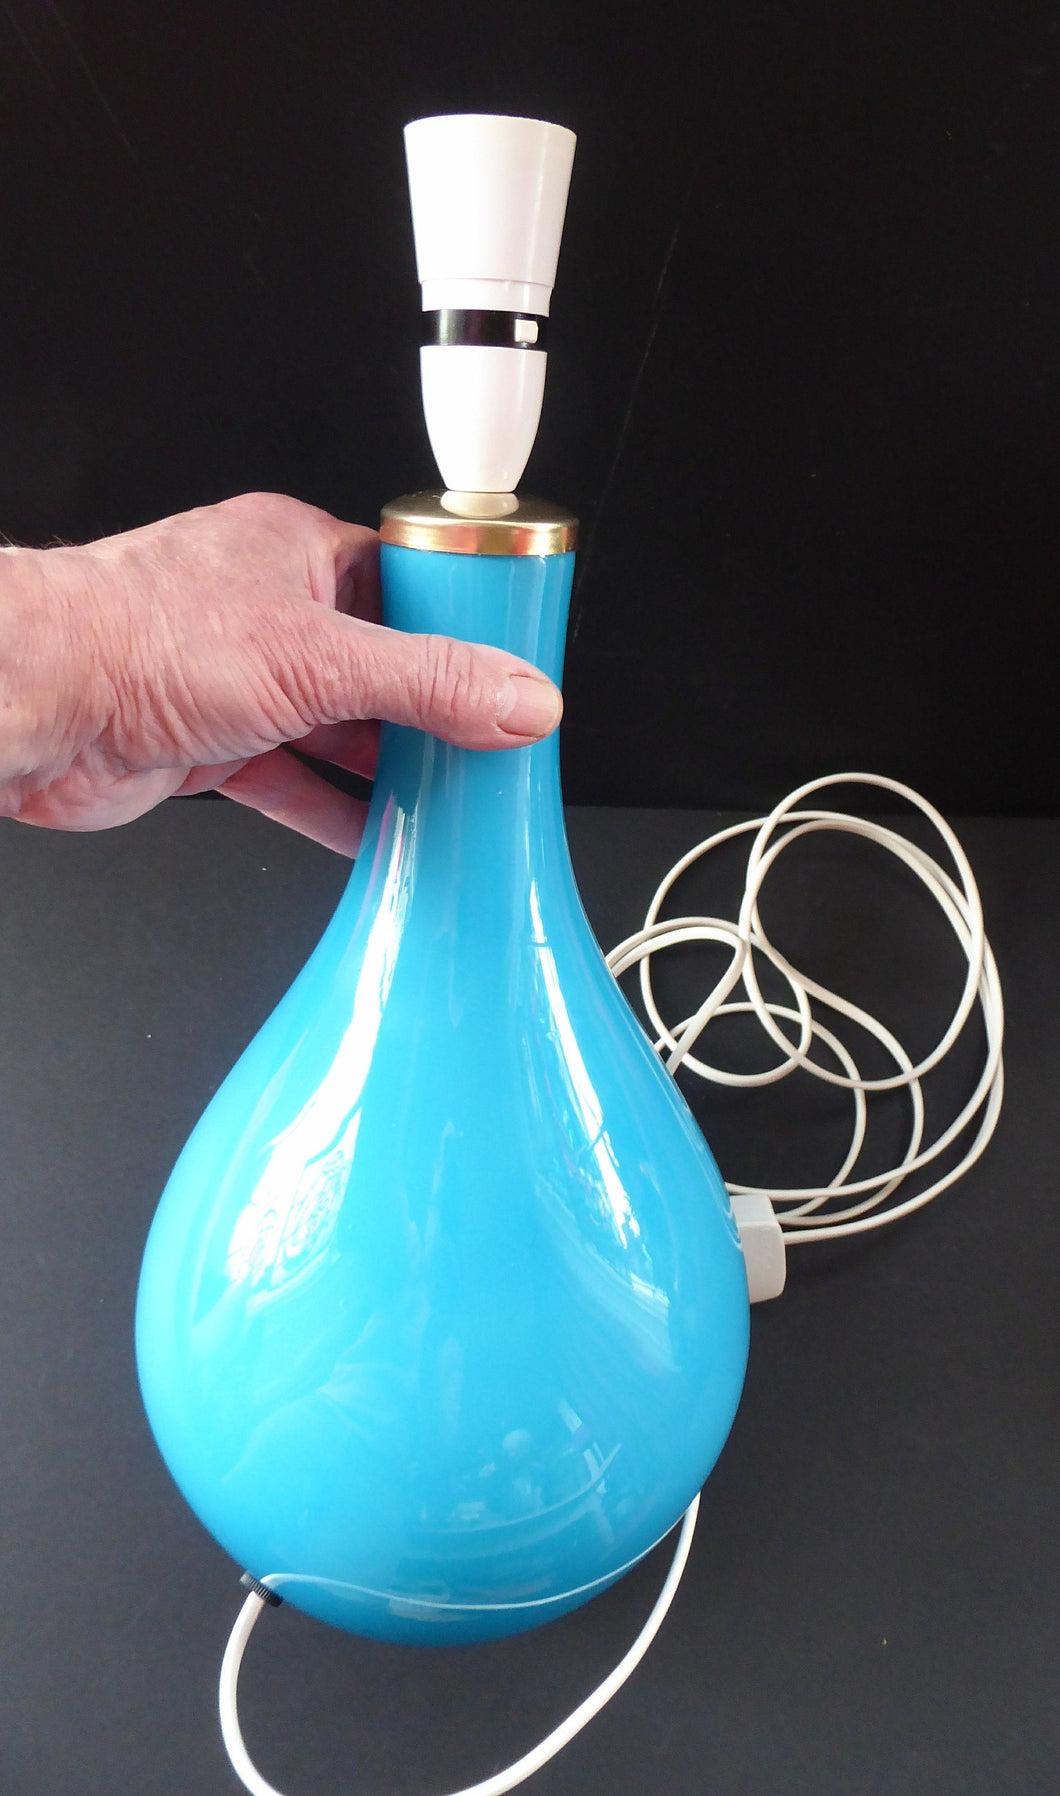 Vintage 1960s HOLMEGAARD Glass Lamp (RE-WIRED) with Original Neck Brass Fitting. Turquoise Blue Coloured Glass. 13 1/2 inches tall